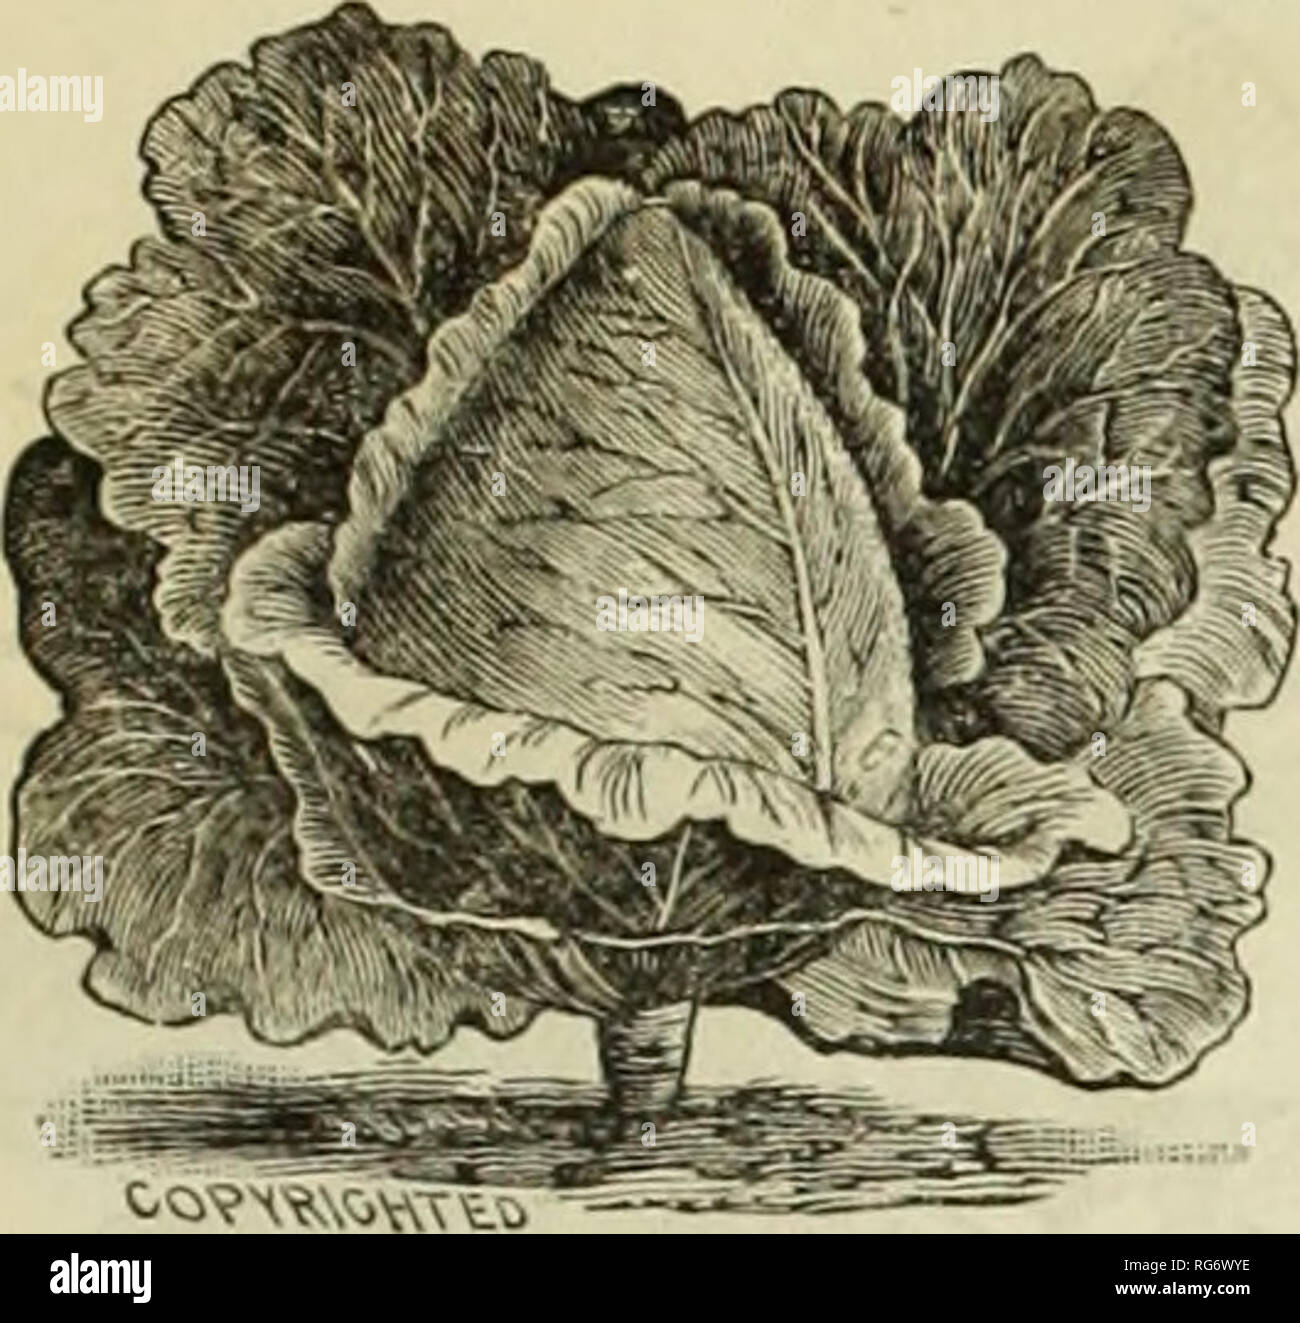 . Burpee's farm annual : garden, farm, and flower seeds. Nursery stock Pennsylvania Philadelphia Catalogs; Flowers Pennsylvania Catalogs; Vegetables Pennsylvania Catalogs; Seeds Pennsylvania Catalogs. 31. JERSEY WAKEFIELD CABBAGE. EARLY JERSEY WAKEFIELD. Many experienced market gardeners consider this the very best &quot;First Early Cabbage.&quot;' It is certainly deserving of its great popularity, and is doubtless grown for market more extensively than any other early cabbage. It has been our aim to have the very finest strain of so important a variety; and from careful comparative tests of a Stock Photo